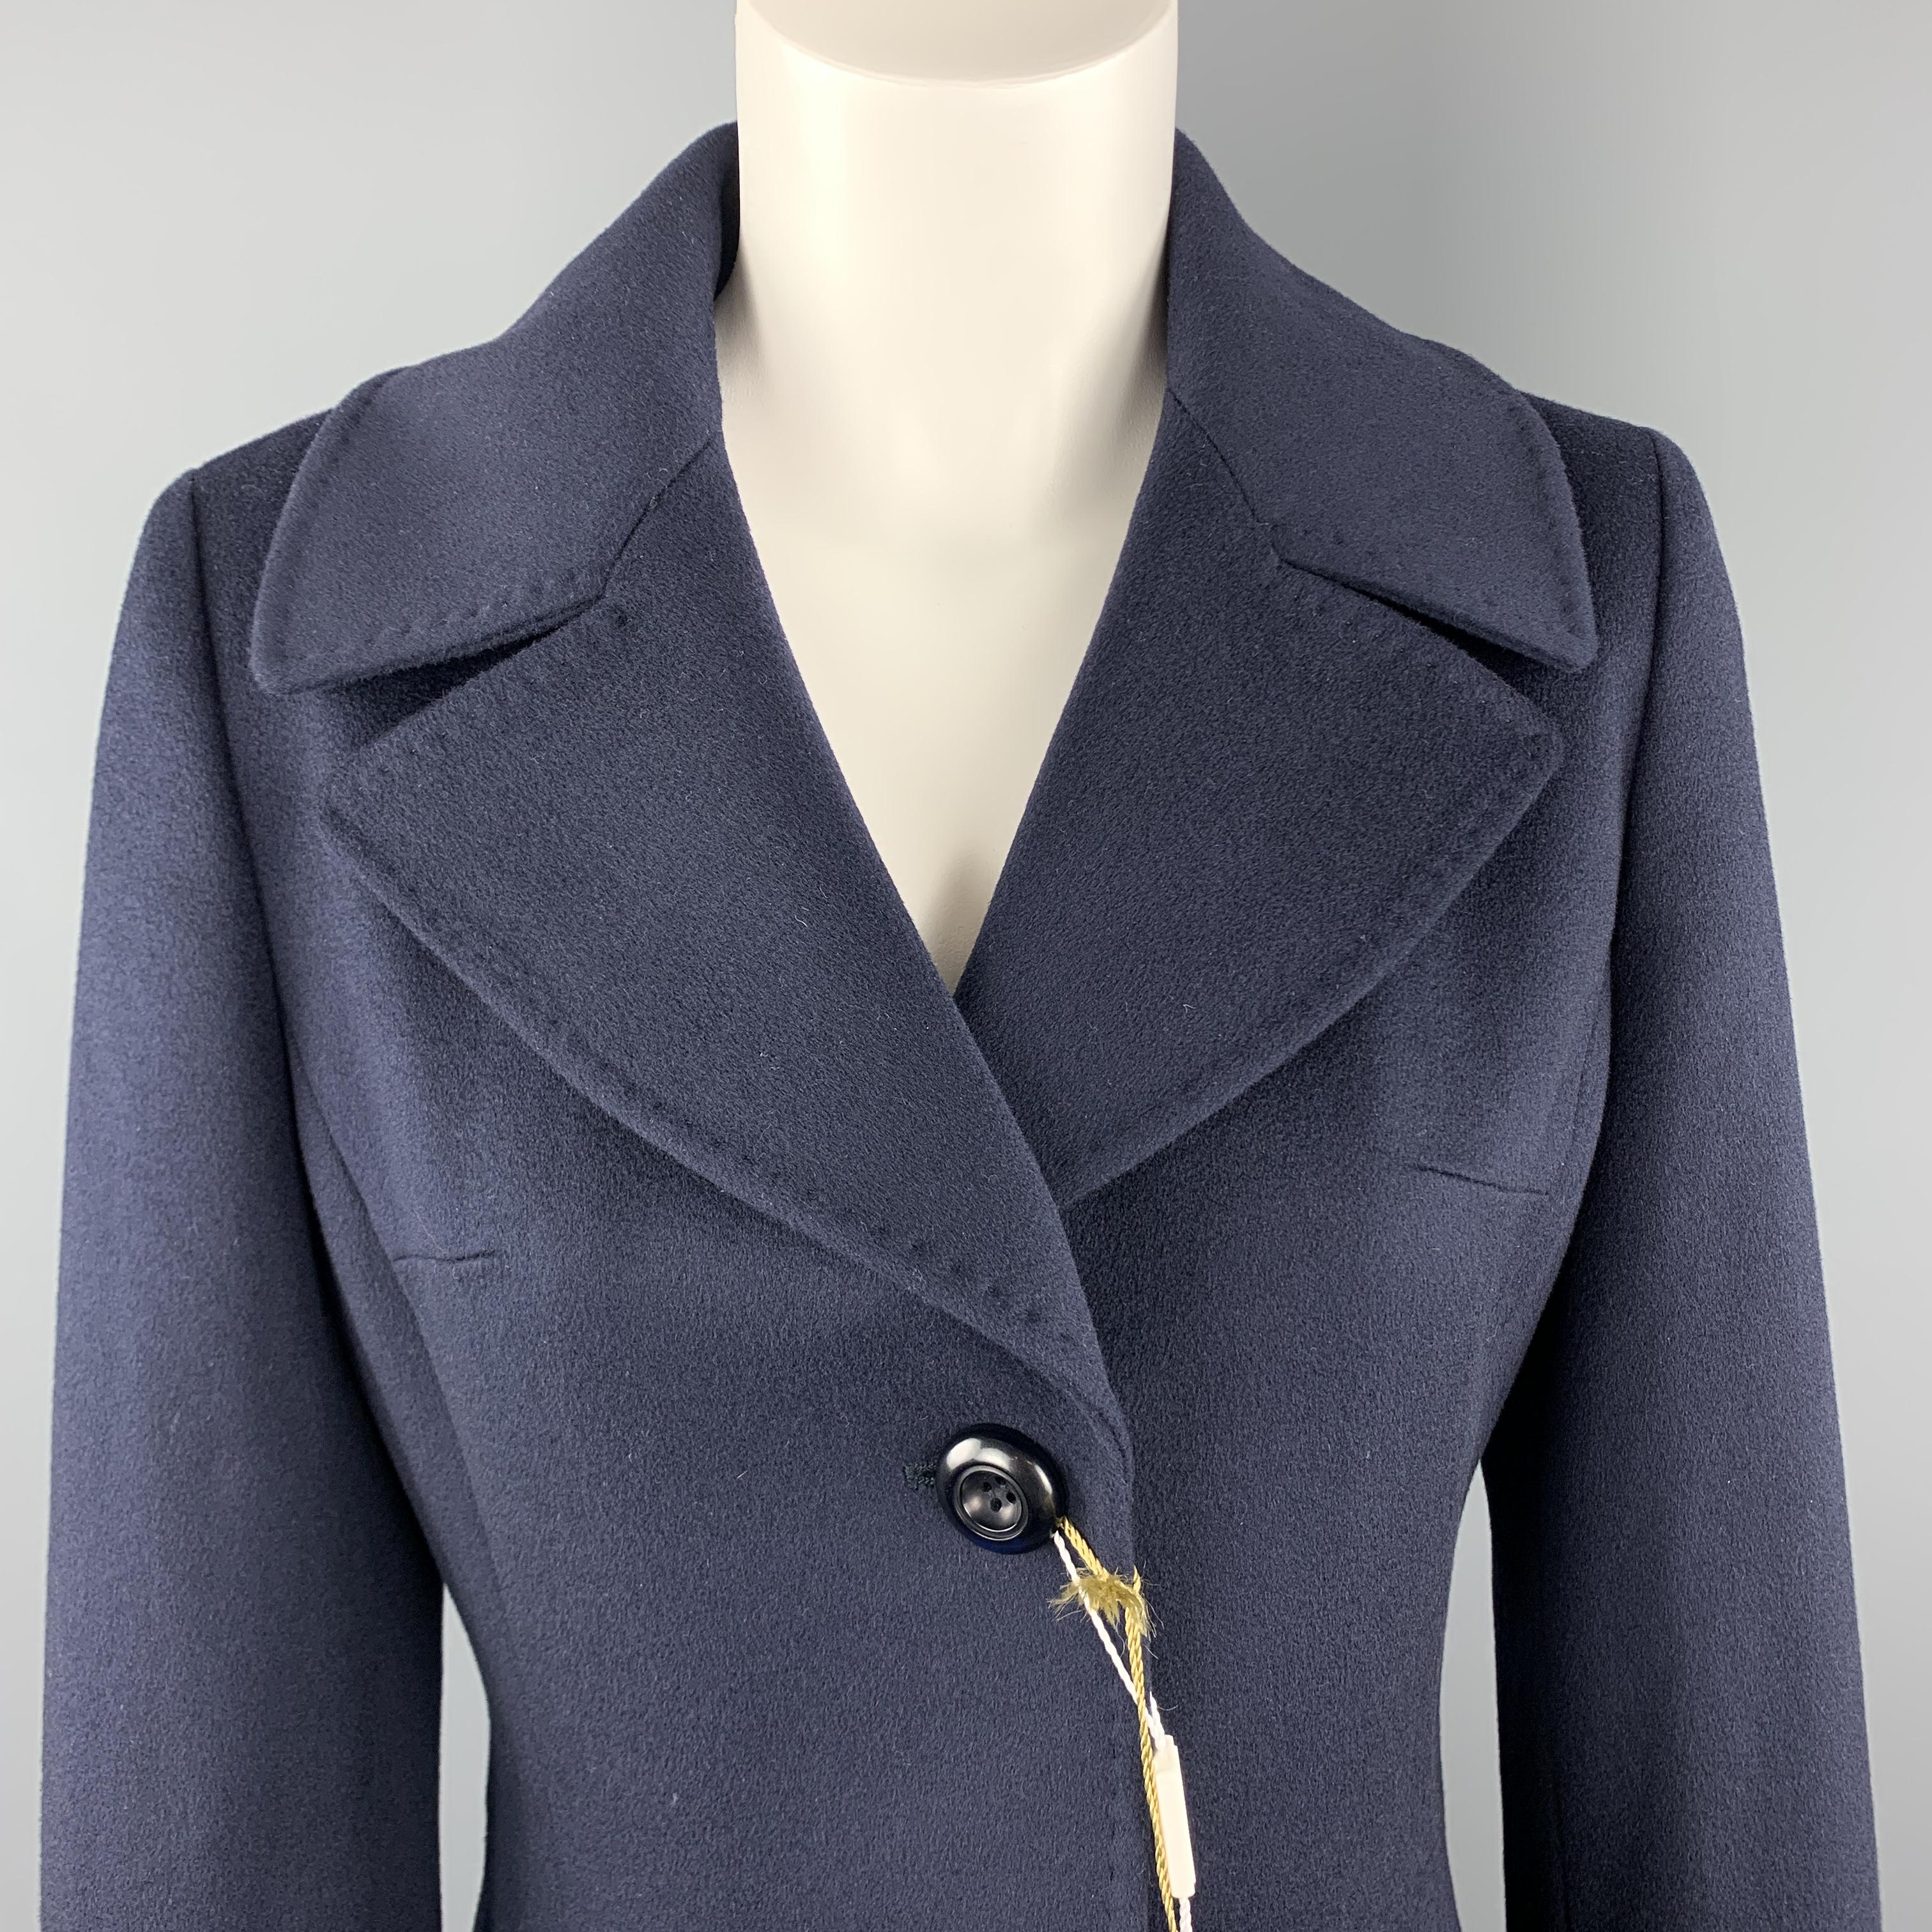 LORO PIANA long coat comes in a solid navy wool material, with a peak lapel, three buttons at closure, slit pockets, a belt at back, sid events, and buttoned cuffs. Made in italy. 

New With Tags. 
Marked: IT 42

Measurements:

Shoulder: 15 in.